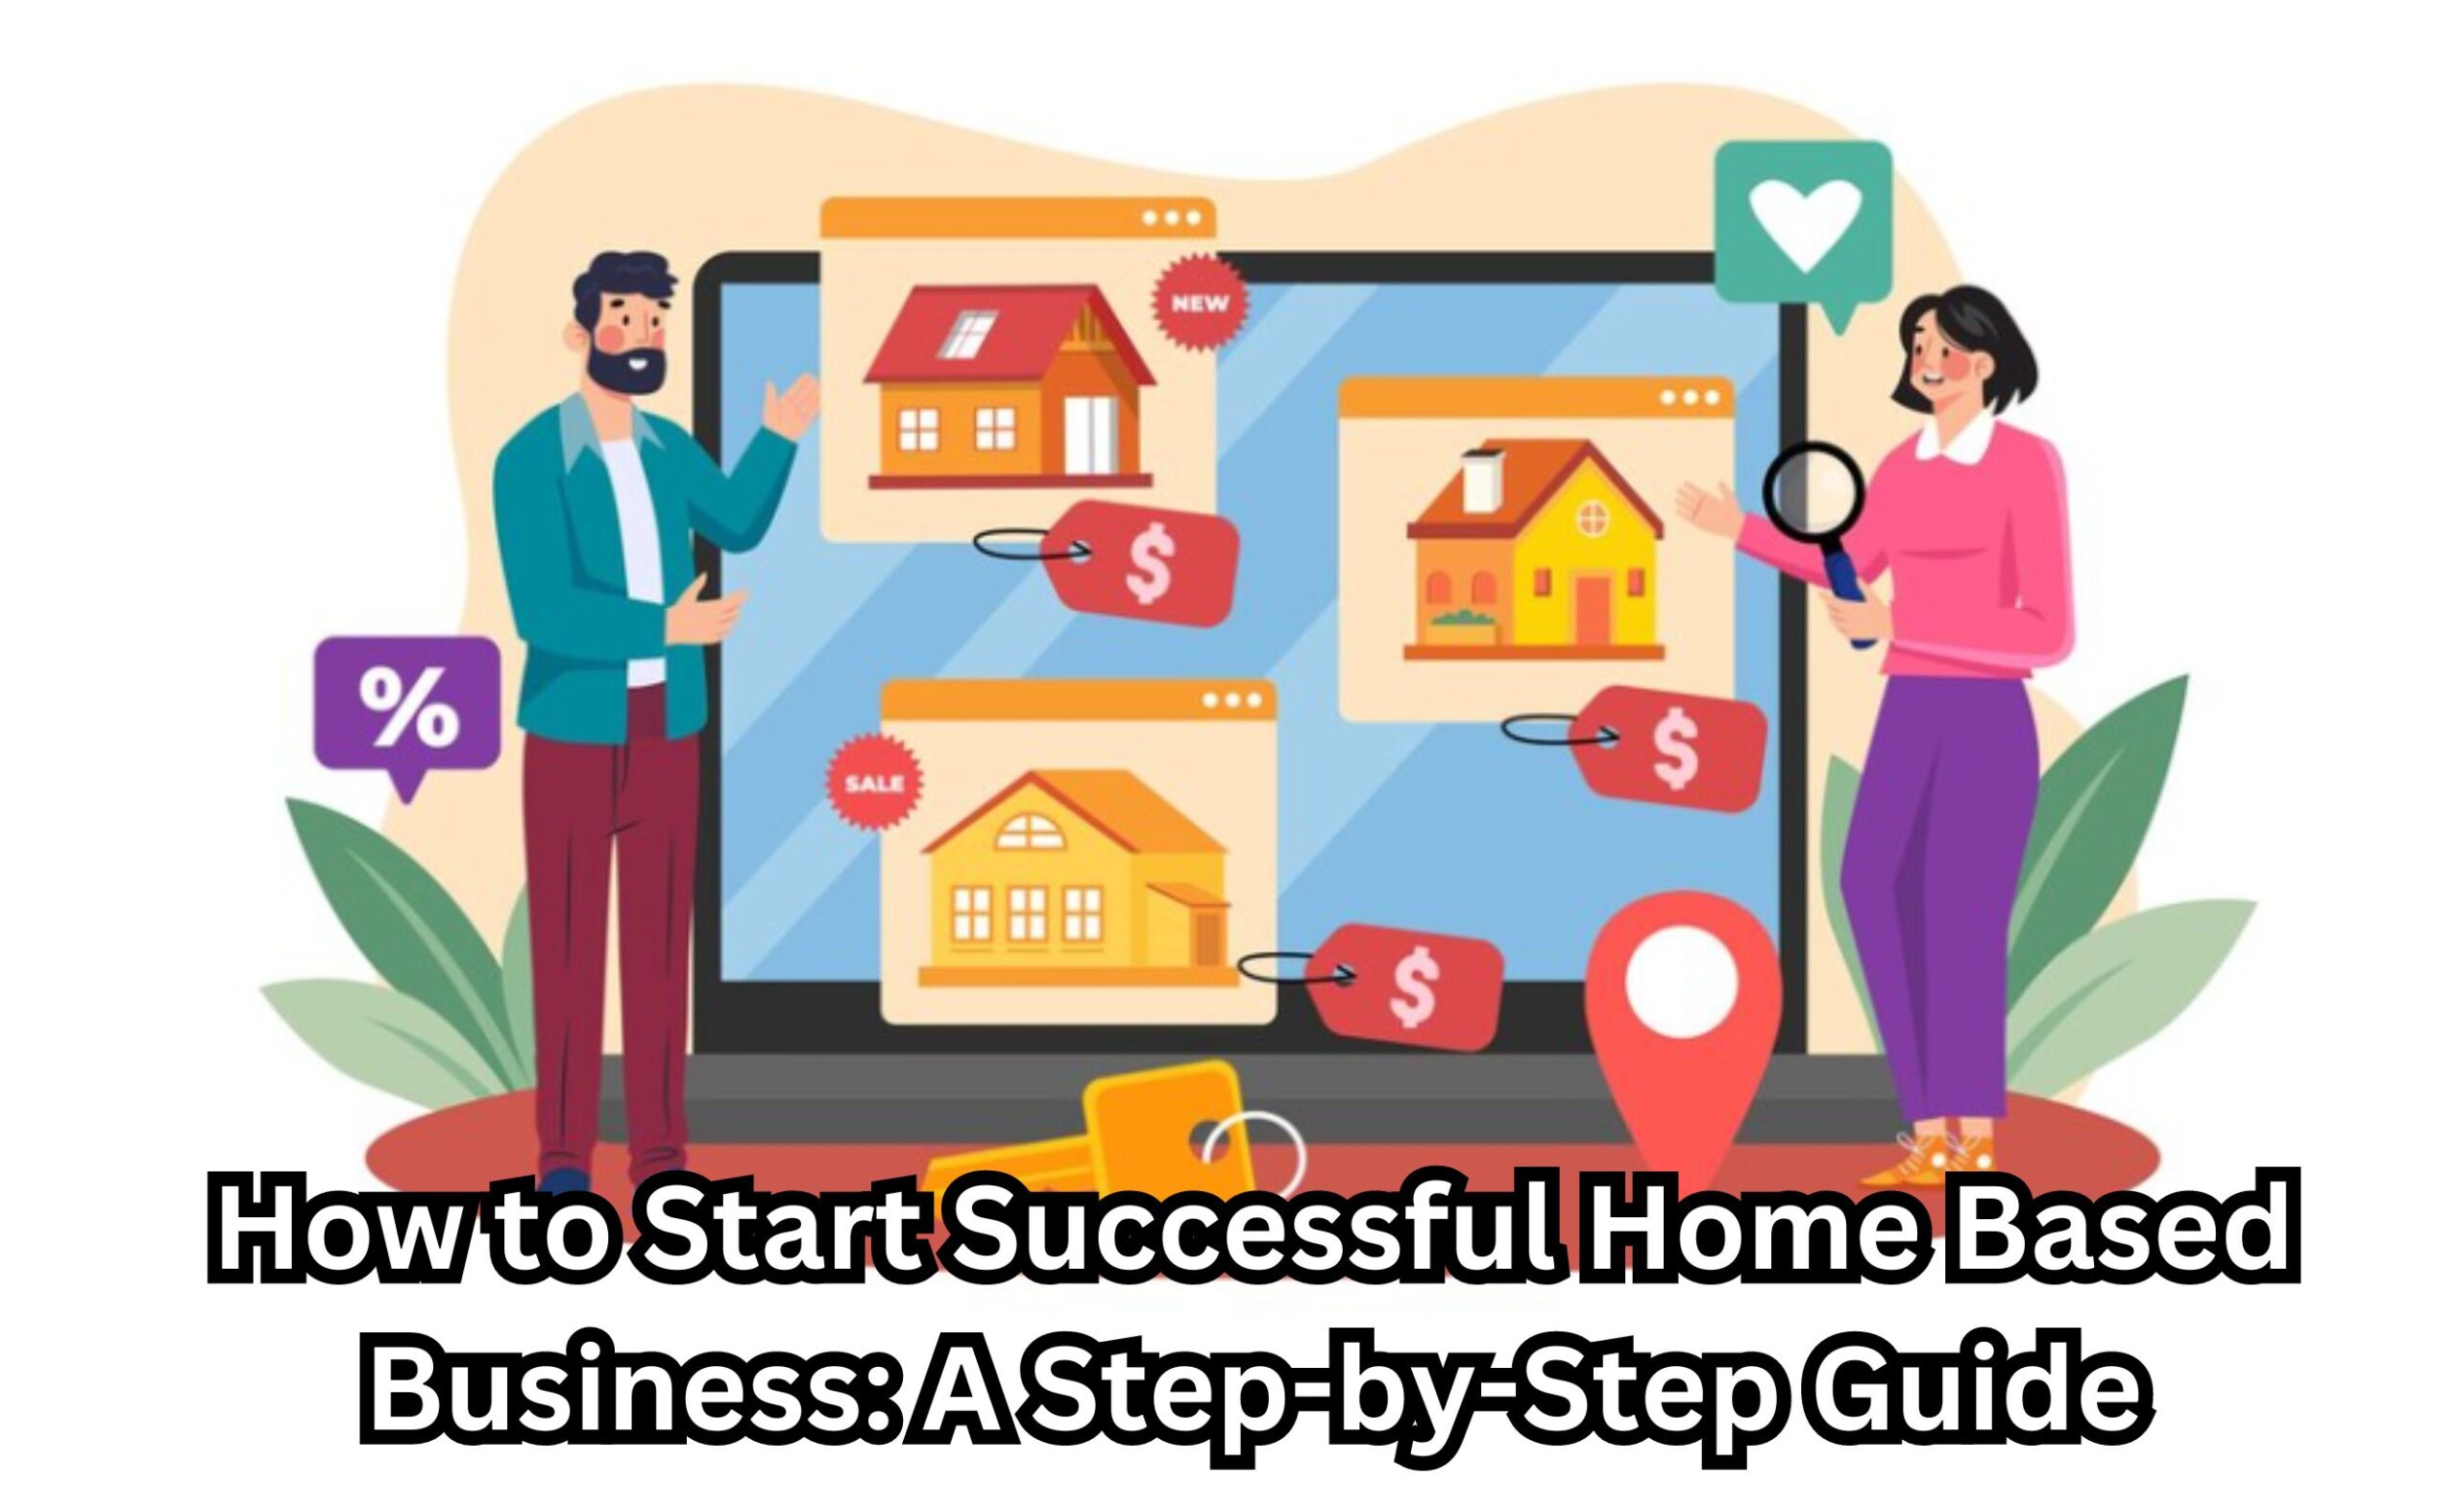 Home Based Business Guide: Key Steps to Success